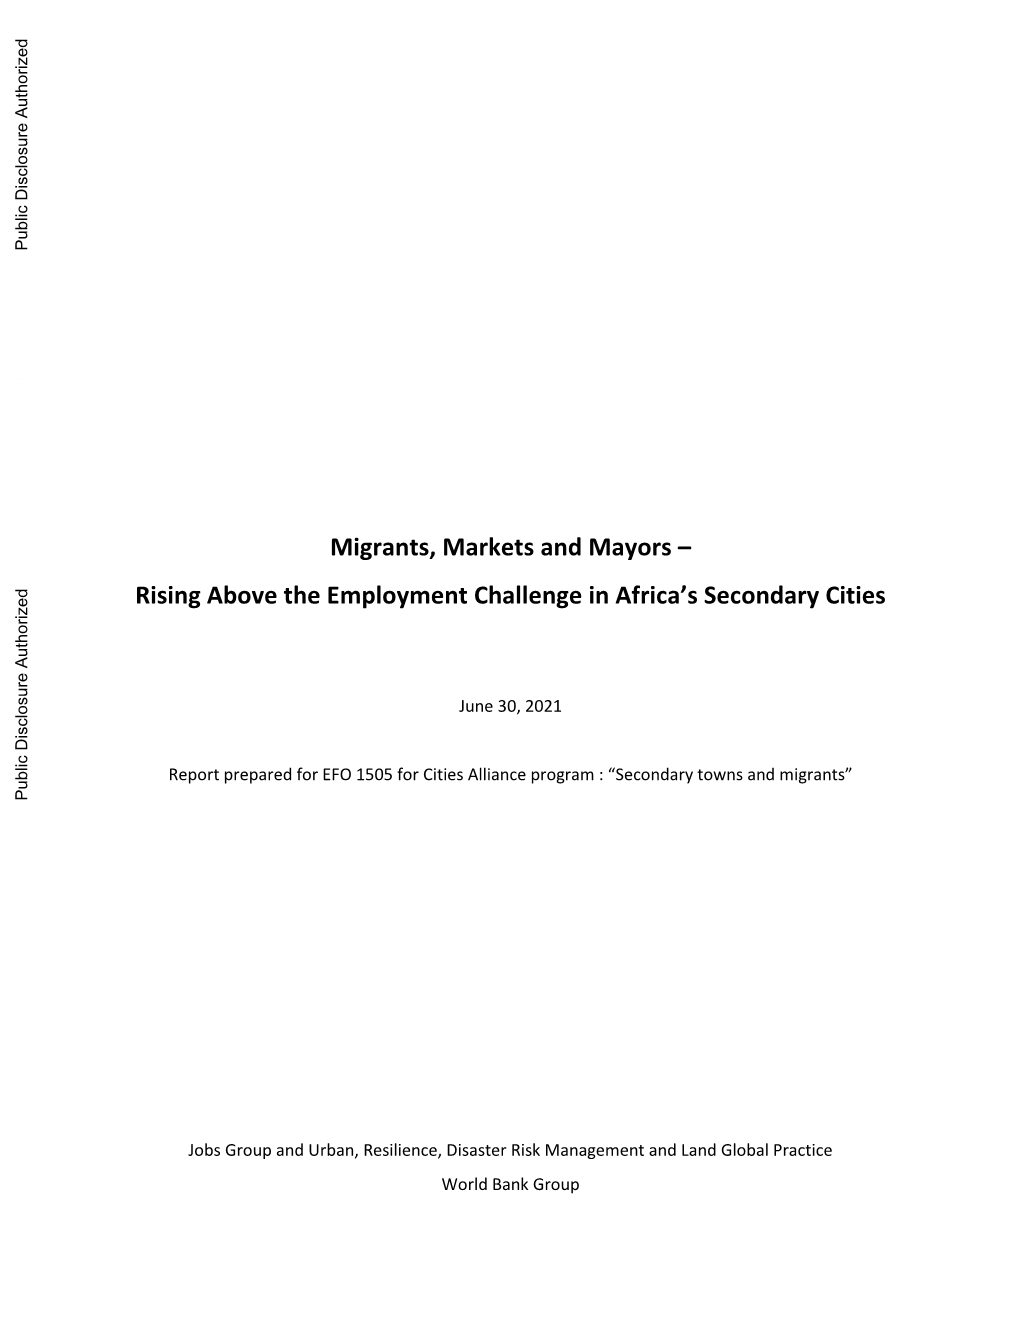 Migrants, Markets and Mayors – Rising Above the Employment Challenge in Africa's Secondary Cities